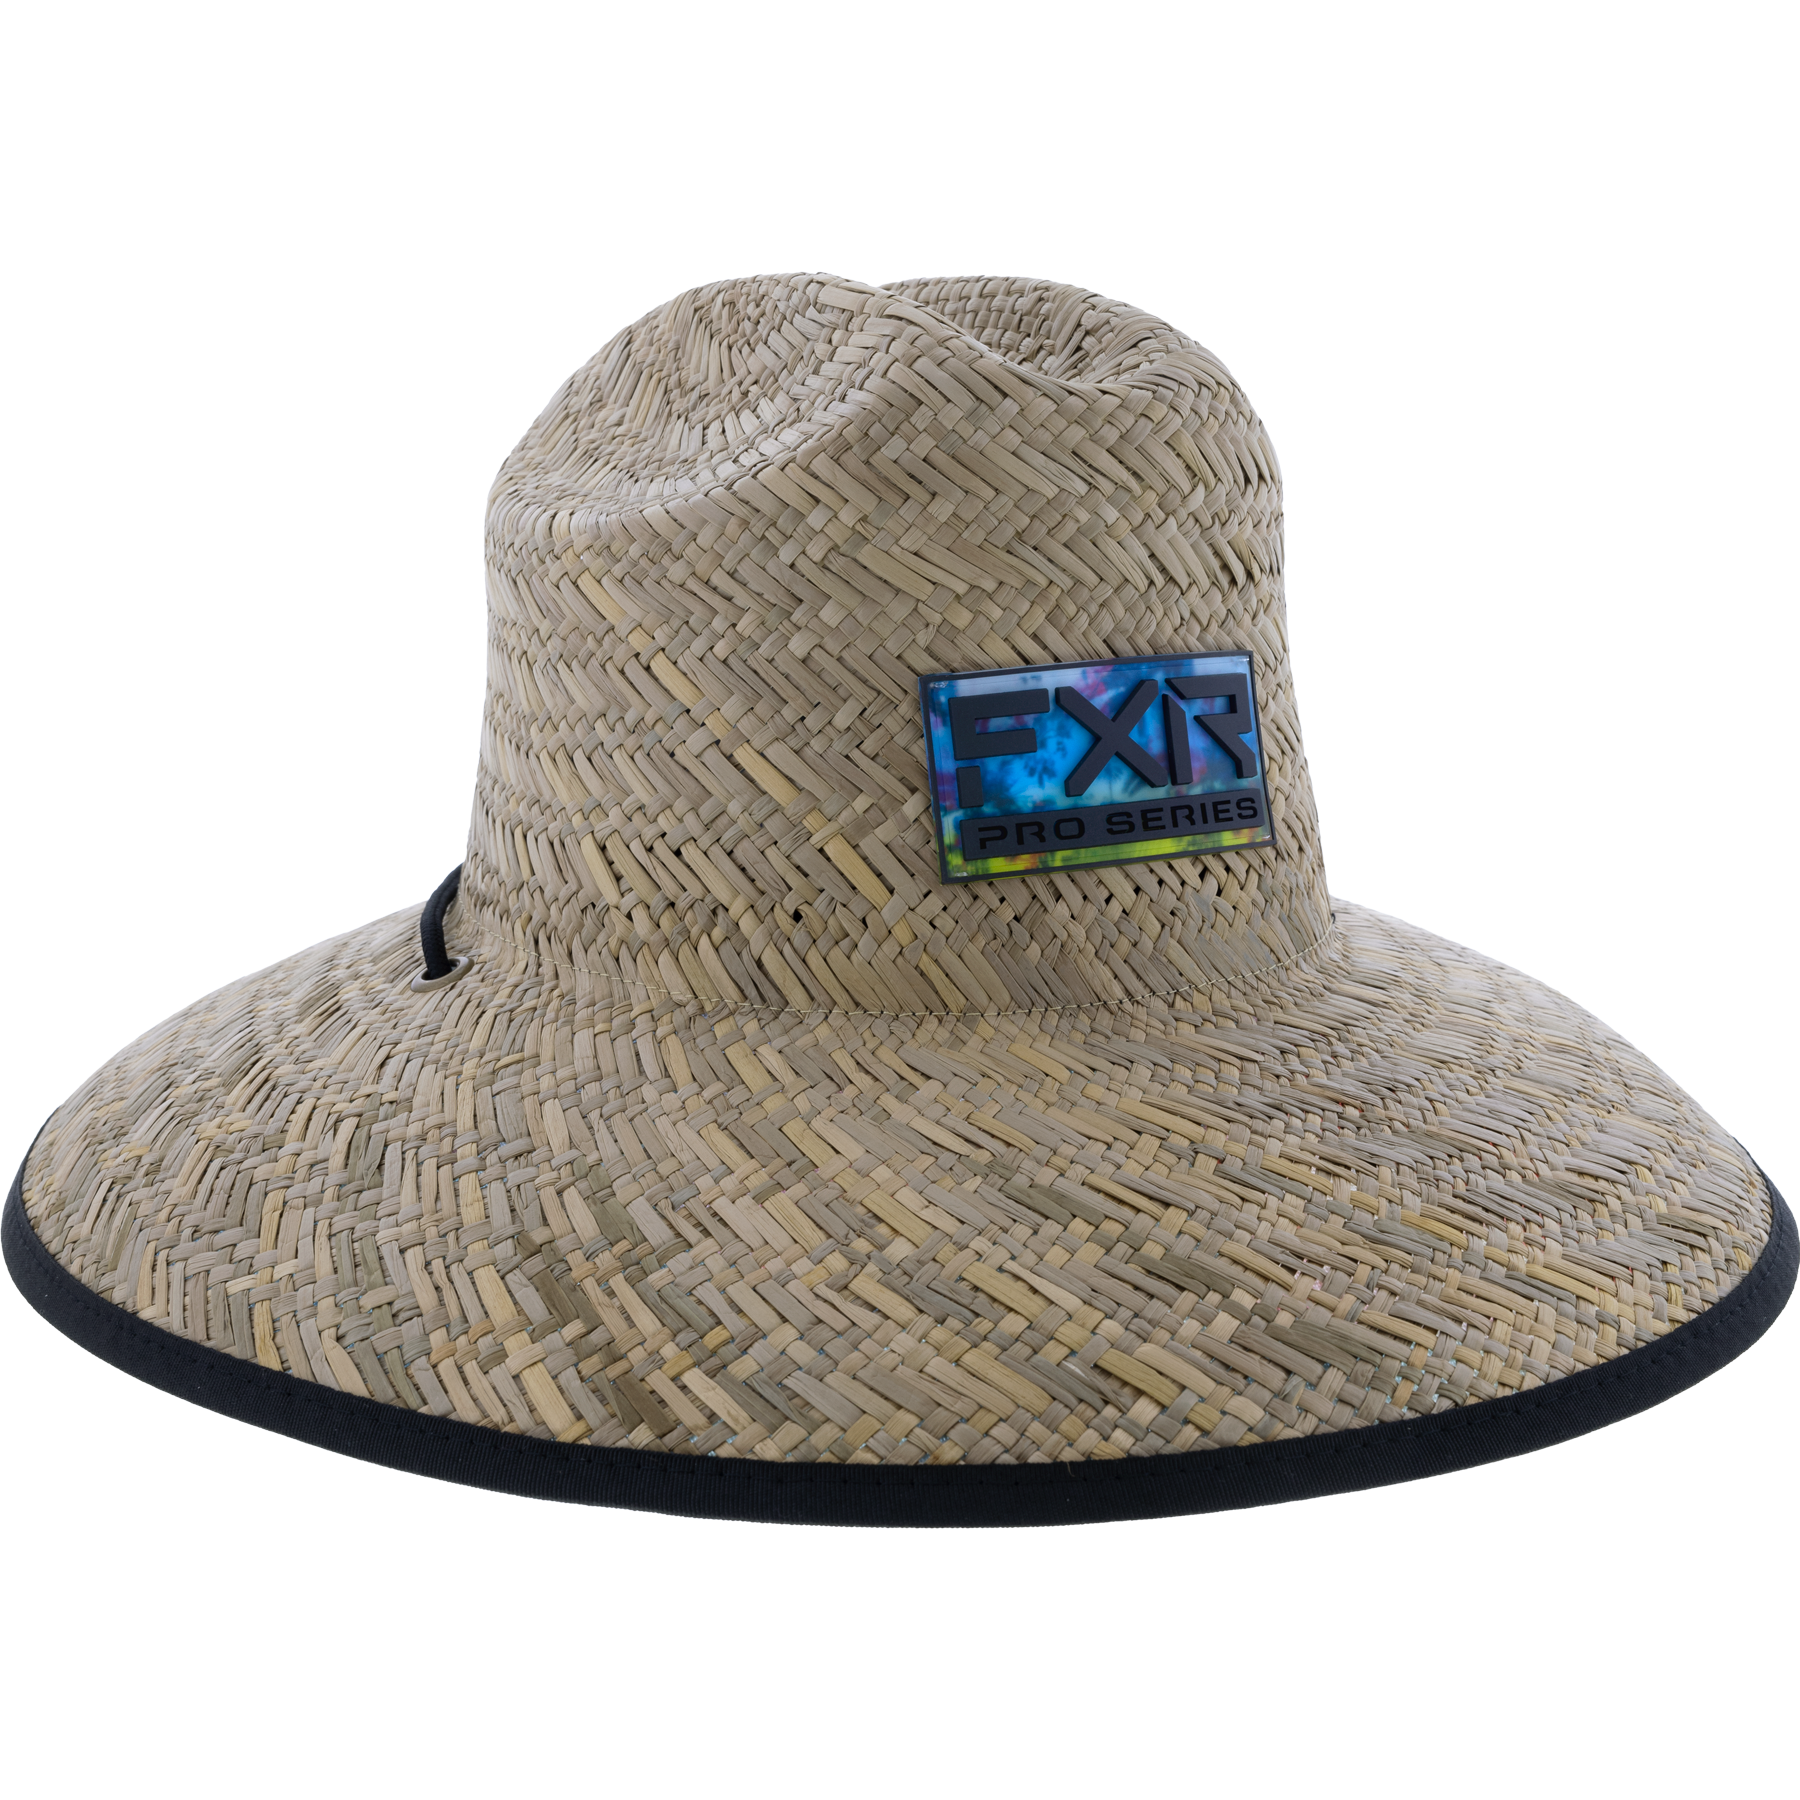 FXR Shoreside YOUTH Straw Hat Tropical